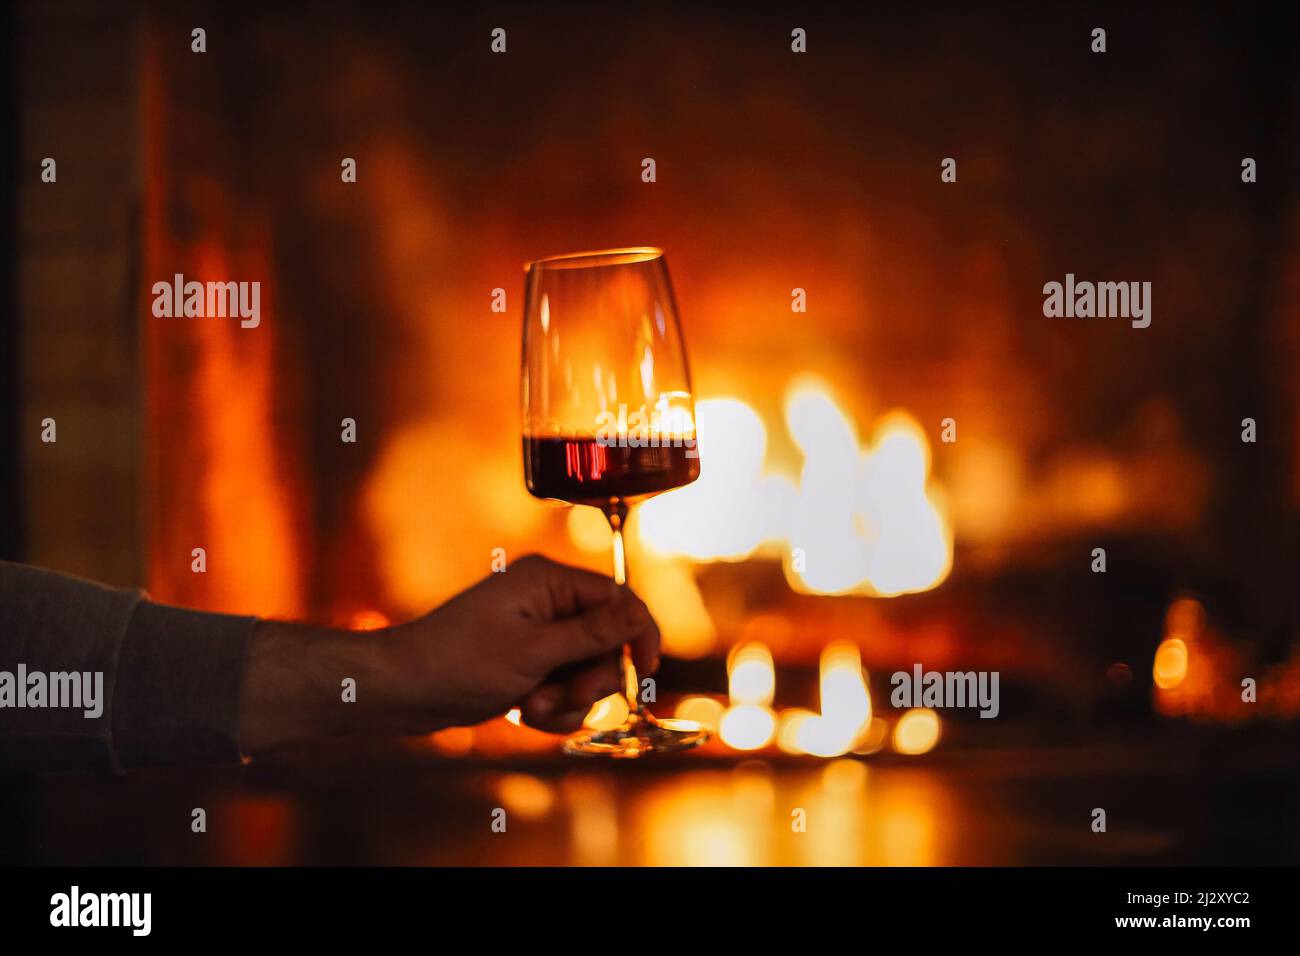 Man having red wine by the fireplace. Close up of man holding and drinking red wine glass by open wood fire place relaxing and enjoying quiet moment a Stock Photo